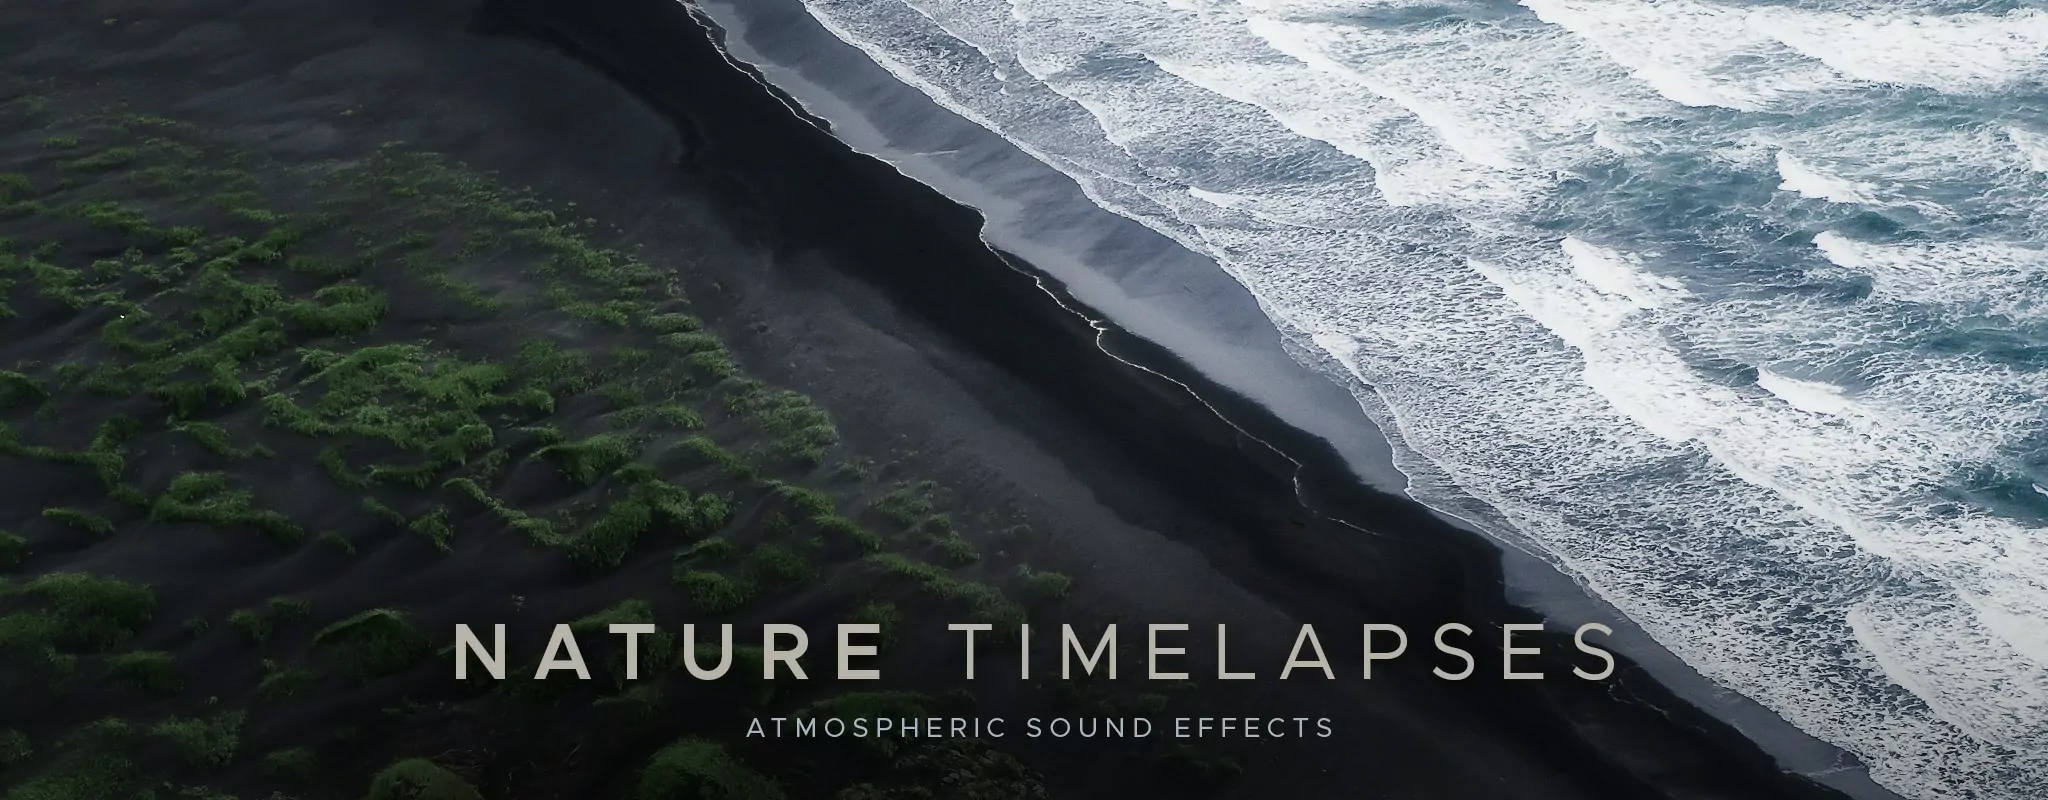 Nature Timelapses